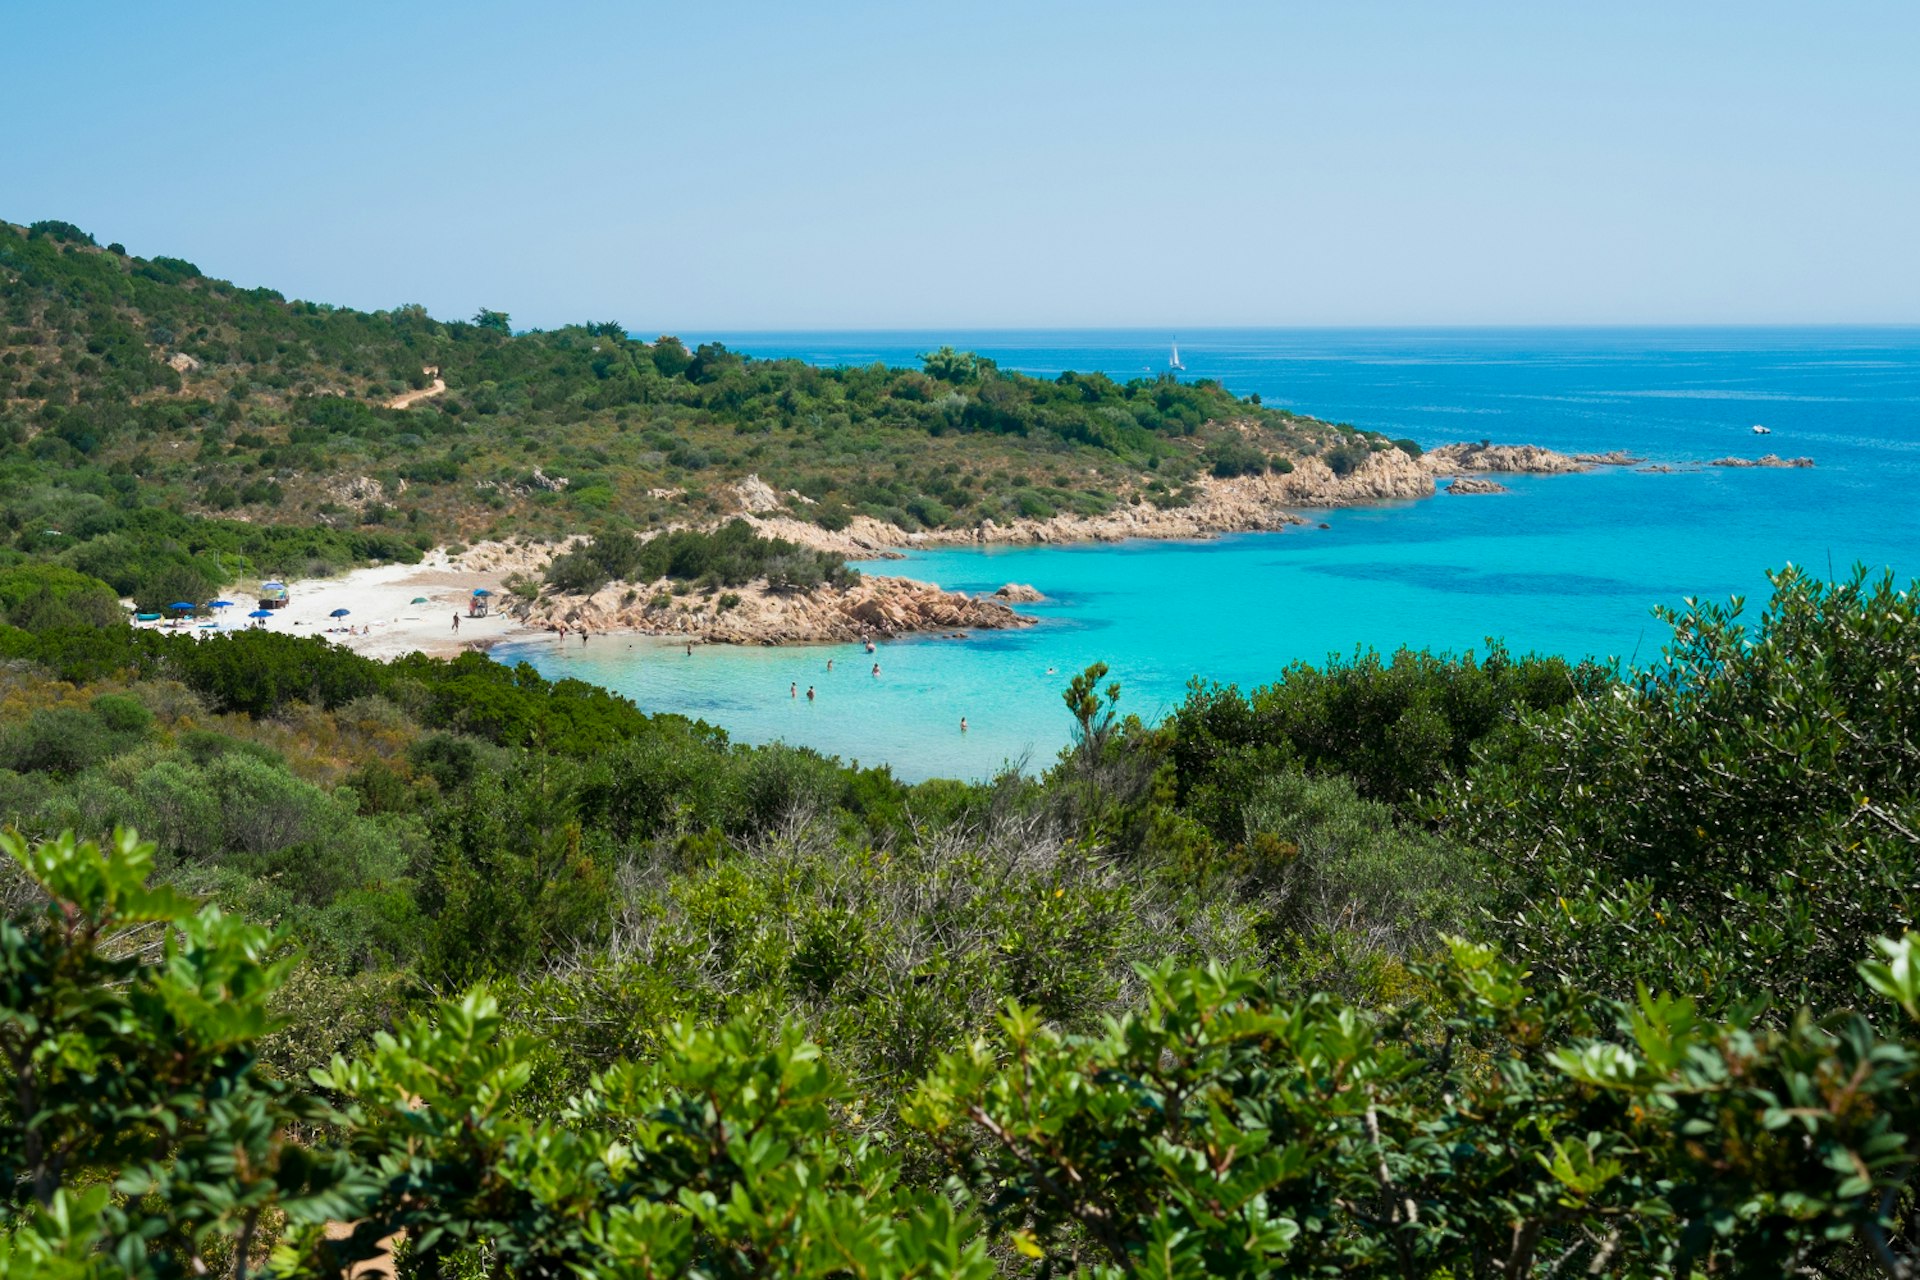 Landscape shot of Spiaggia del Principe with greenery backing the white-sand beach and light blue waters.